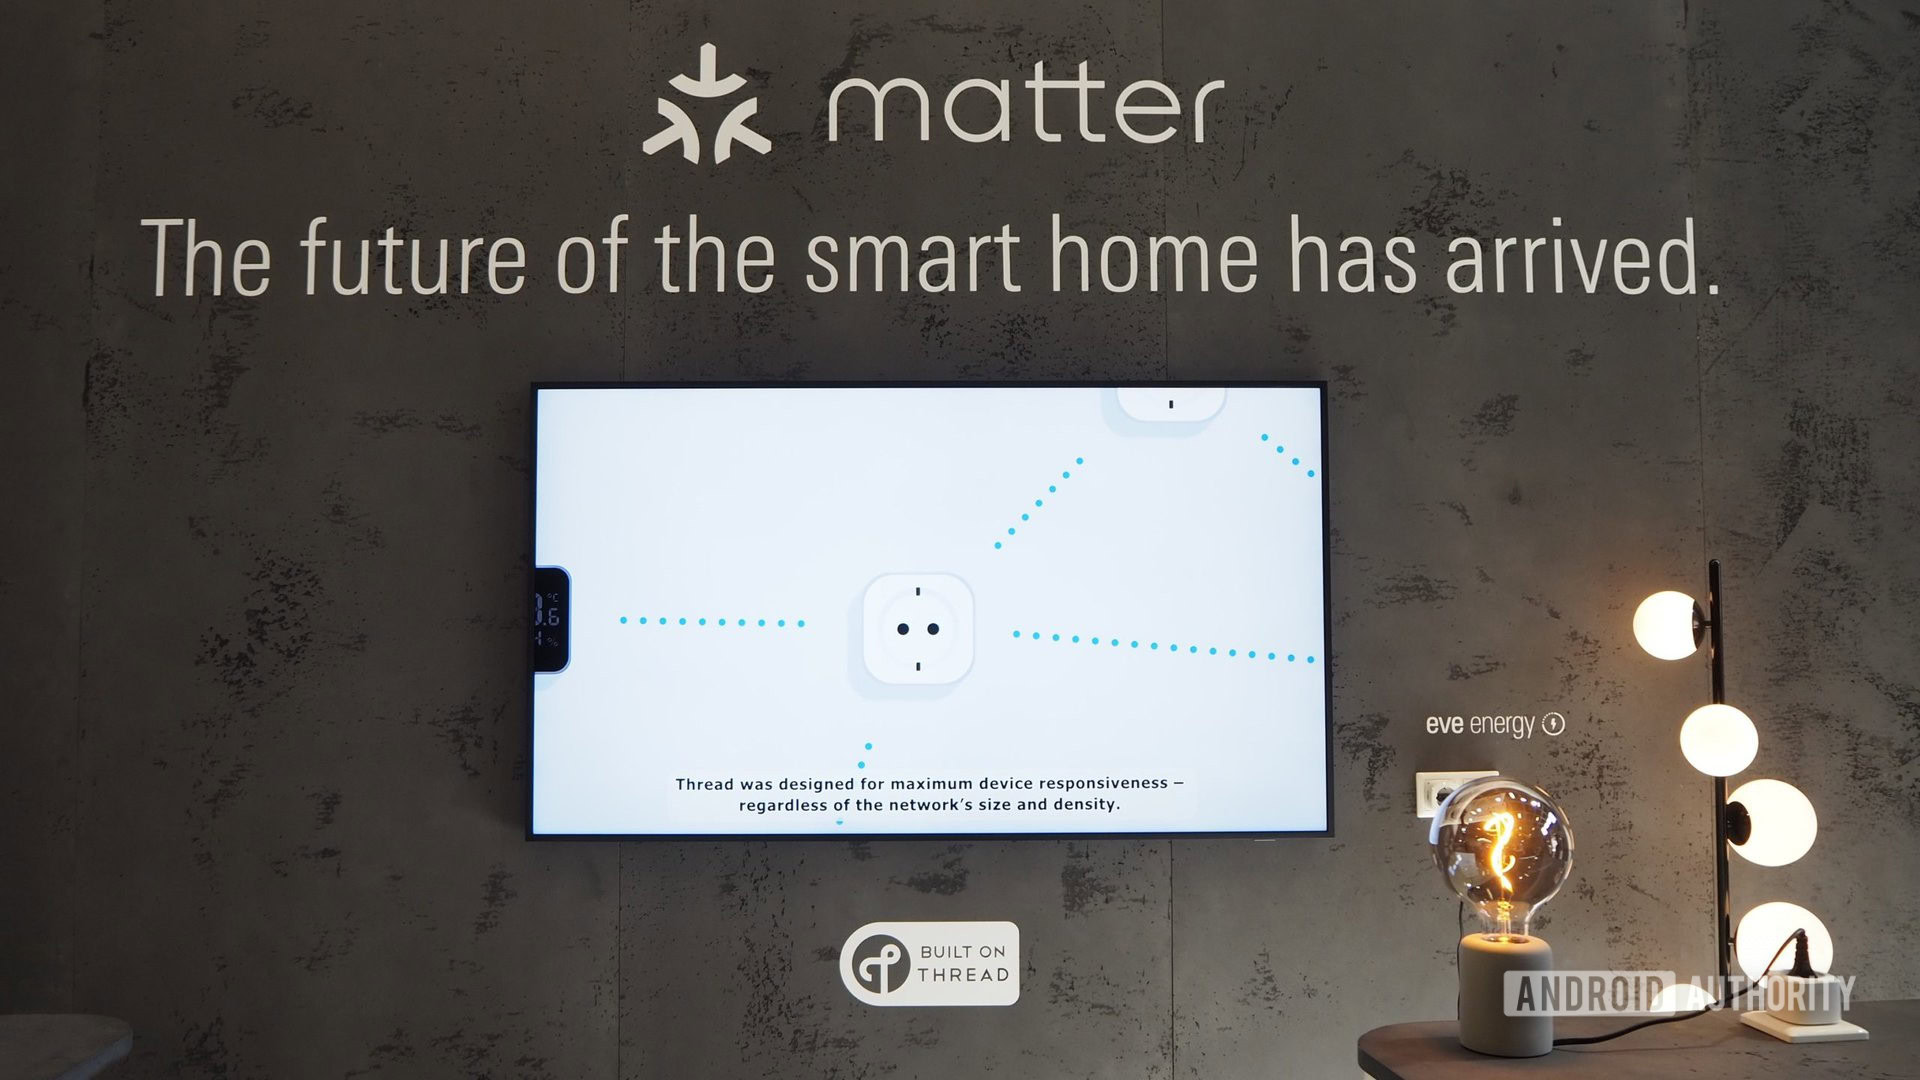 Matter is now available on Google Nest and Android devices